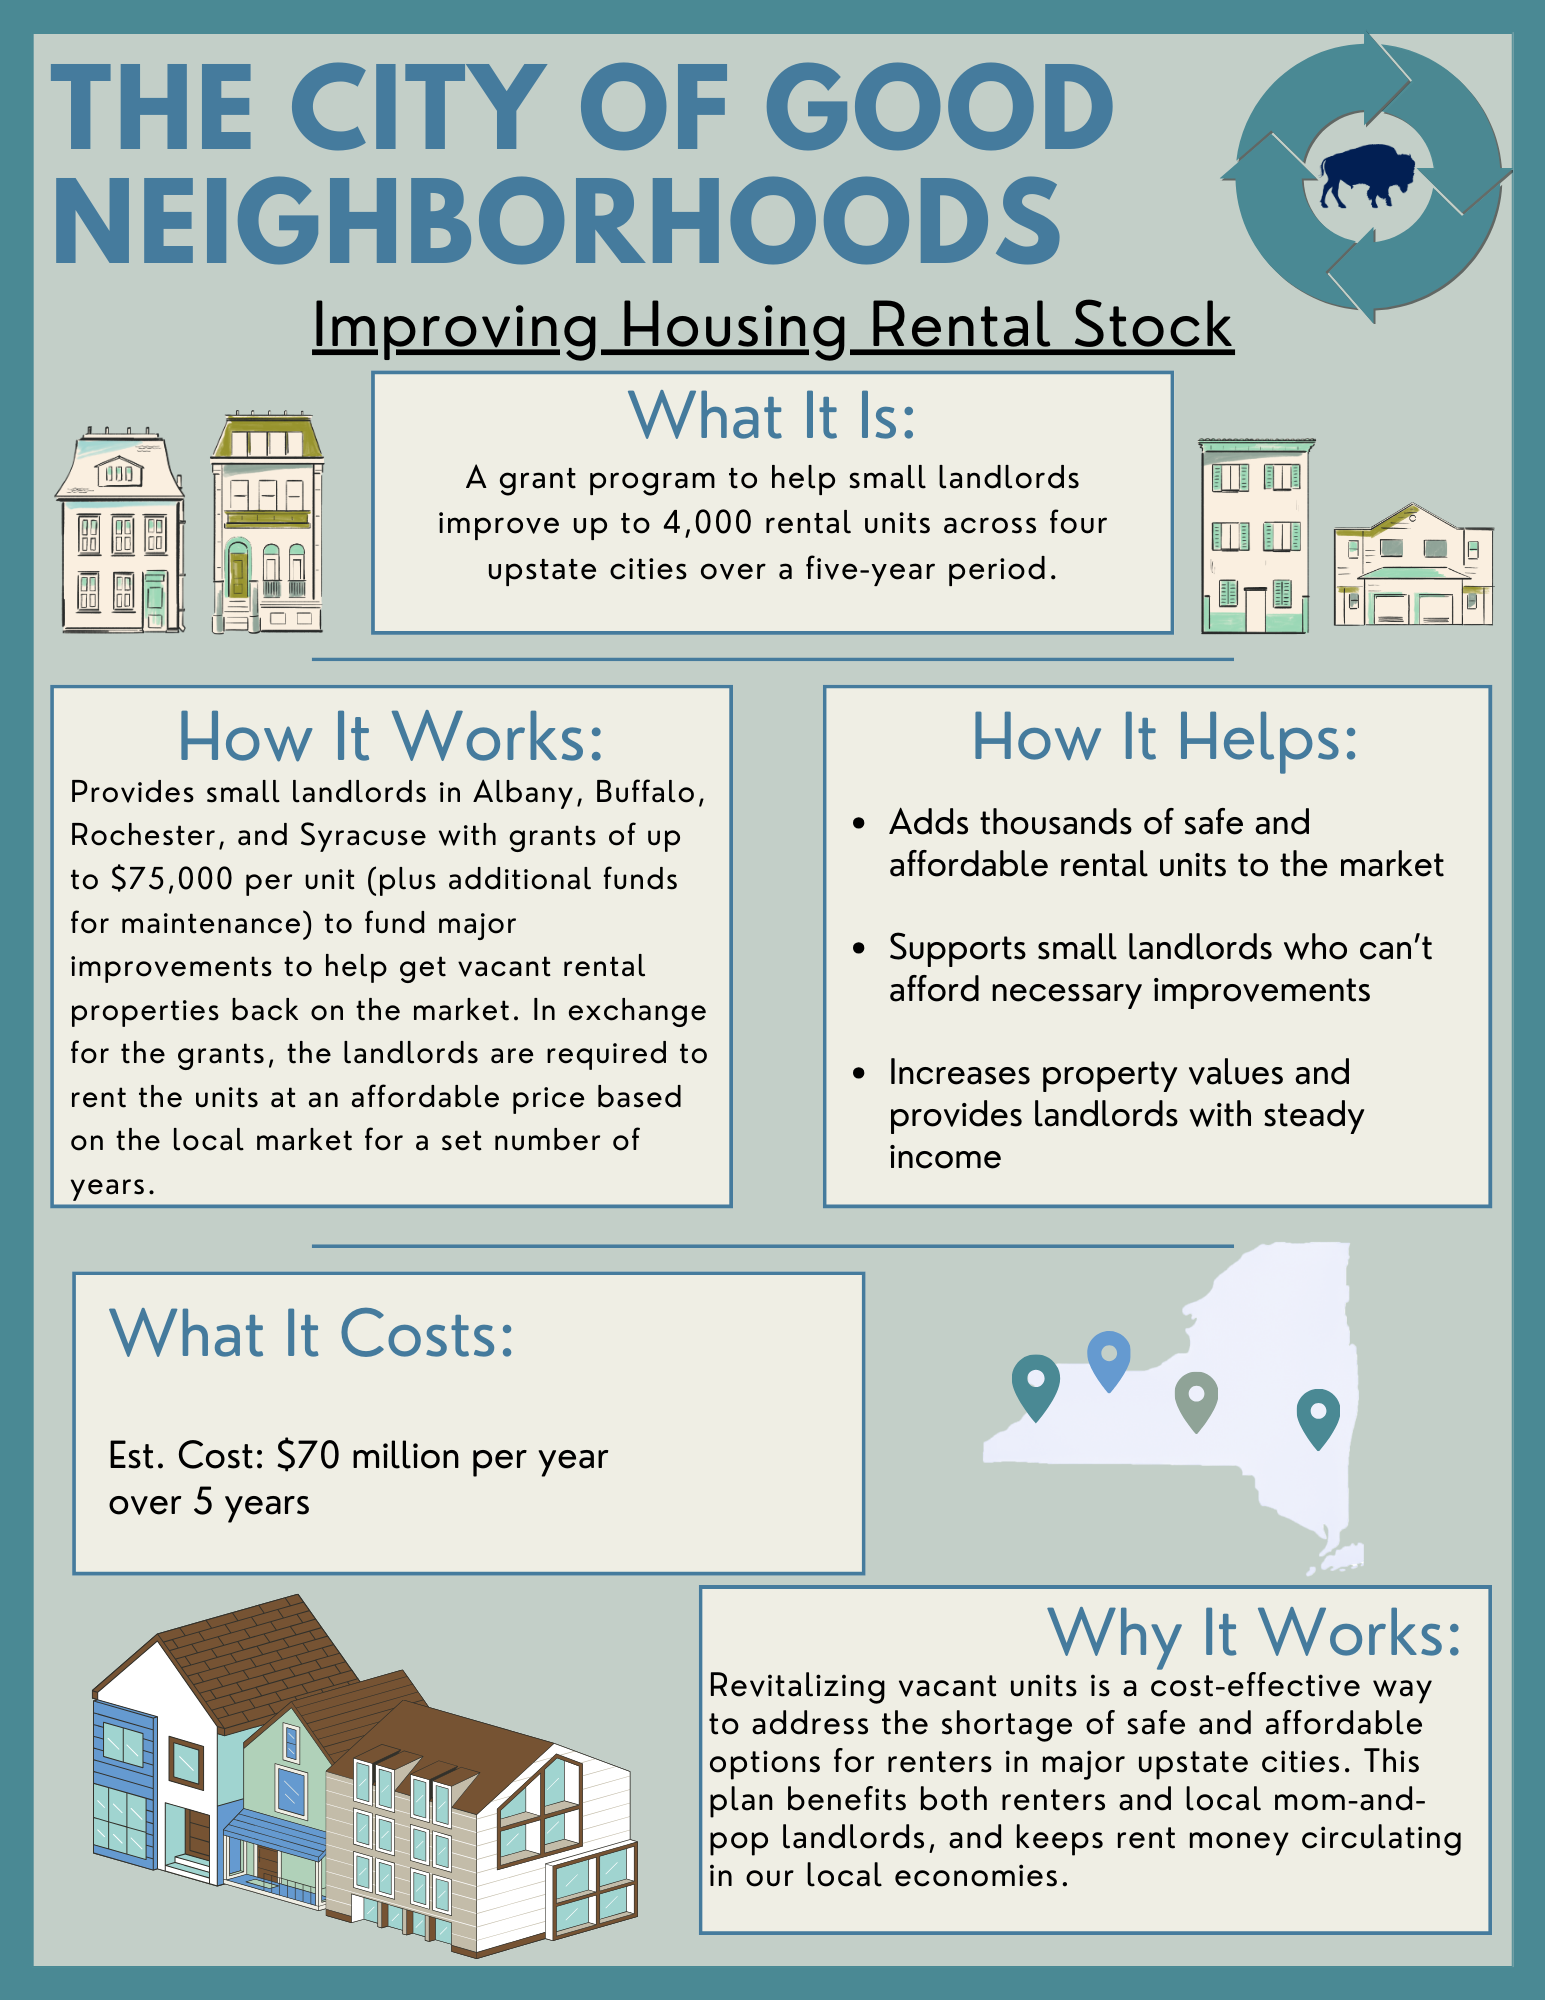 Improving Rental Housing Stock What It Is: A grant program to help small landlords improve up to 4,000 rental units across four upstate cities over a five-year period.  How It Works: Provides small landlords in Albany, Buffalo, Rochester, and Syracuse with grants of up to $75,000 per unit (plus additional funds for maintenance) to fund major improvements to help get vacant rental properties back on the market. In exchange for the grants, the landlords are required to rent the units at an affordable price based on the local market for a set number of years.  How It Helps: ● Adds thousands of safe and affordable rental units to the market ● Supports small landlords who can’t afford necessary improvements ● Increases property values and provides landlords with steady income  What It Costs: Est. Cost: $70 million per year over 5 years  Why It Works: Revitalizing vacant units is a cost-effective way to address the shortage of safe and affordable options for renters in major upstate cities. This plan benefits both renters and local mom-and- pop landlords, and keeps rent money circulating in our local economies.